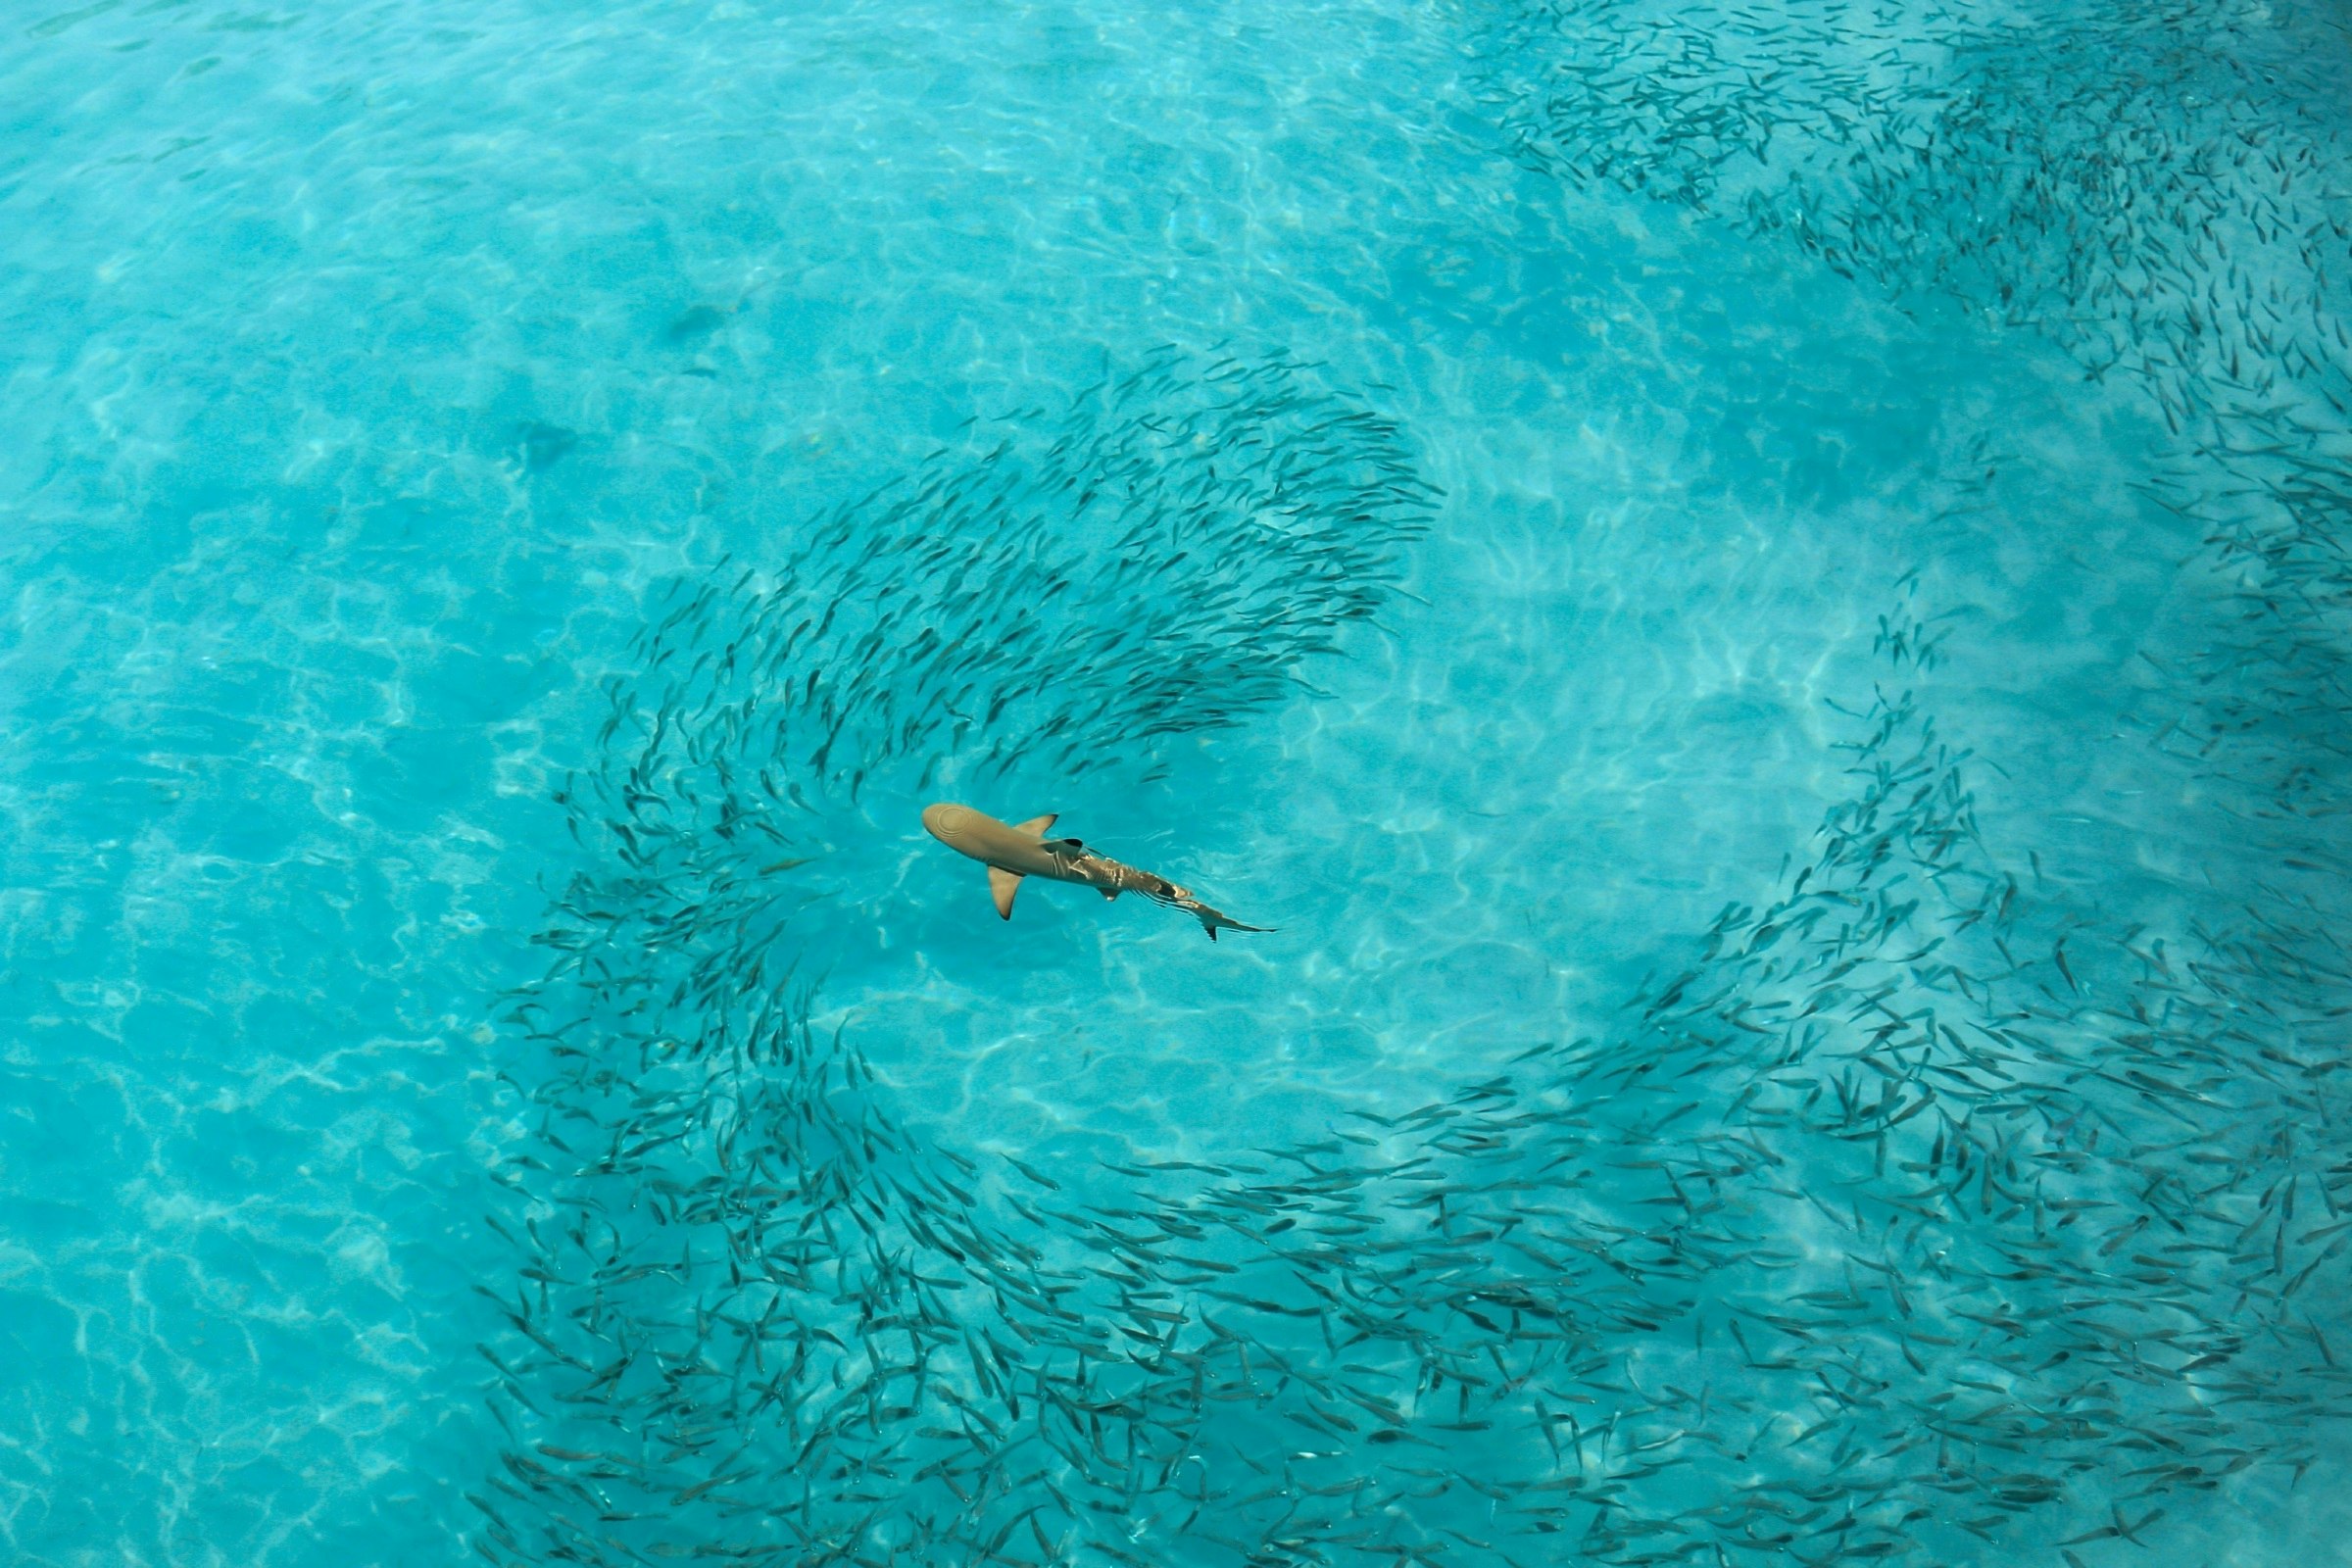 Aerial shot of a clear turquoise ocean with a grey shark swimming through a shoal of fish, who have formed a swirl shape around the shark